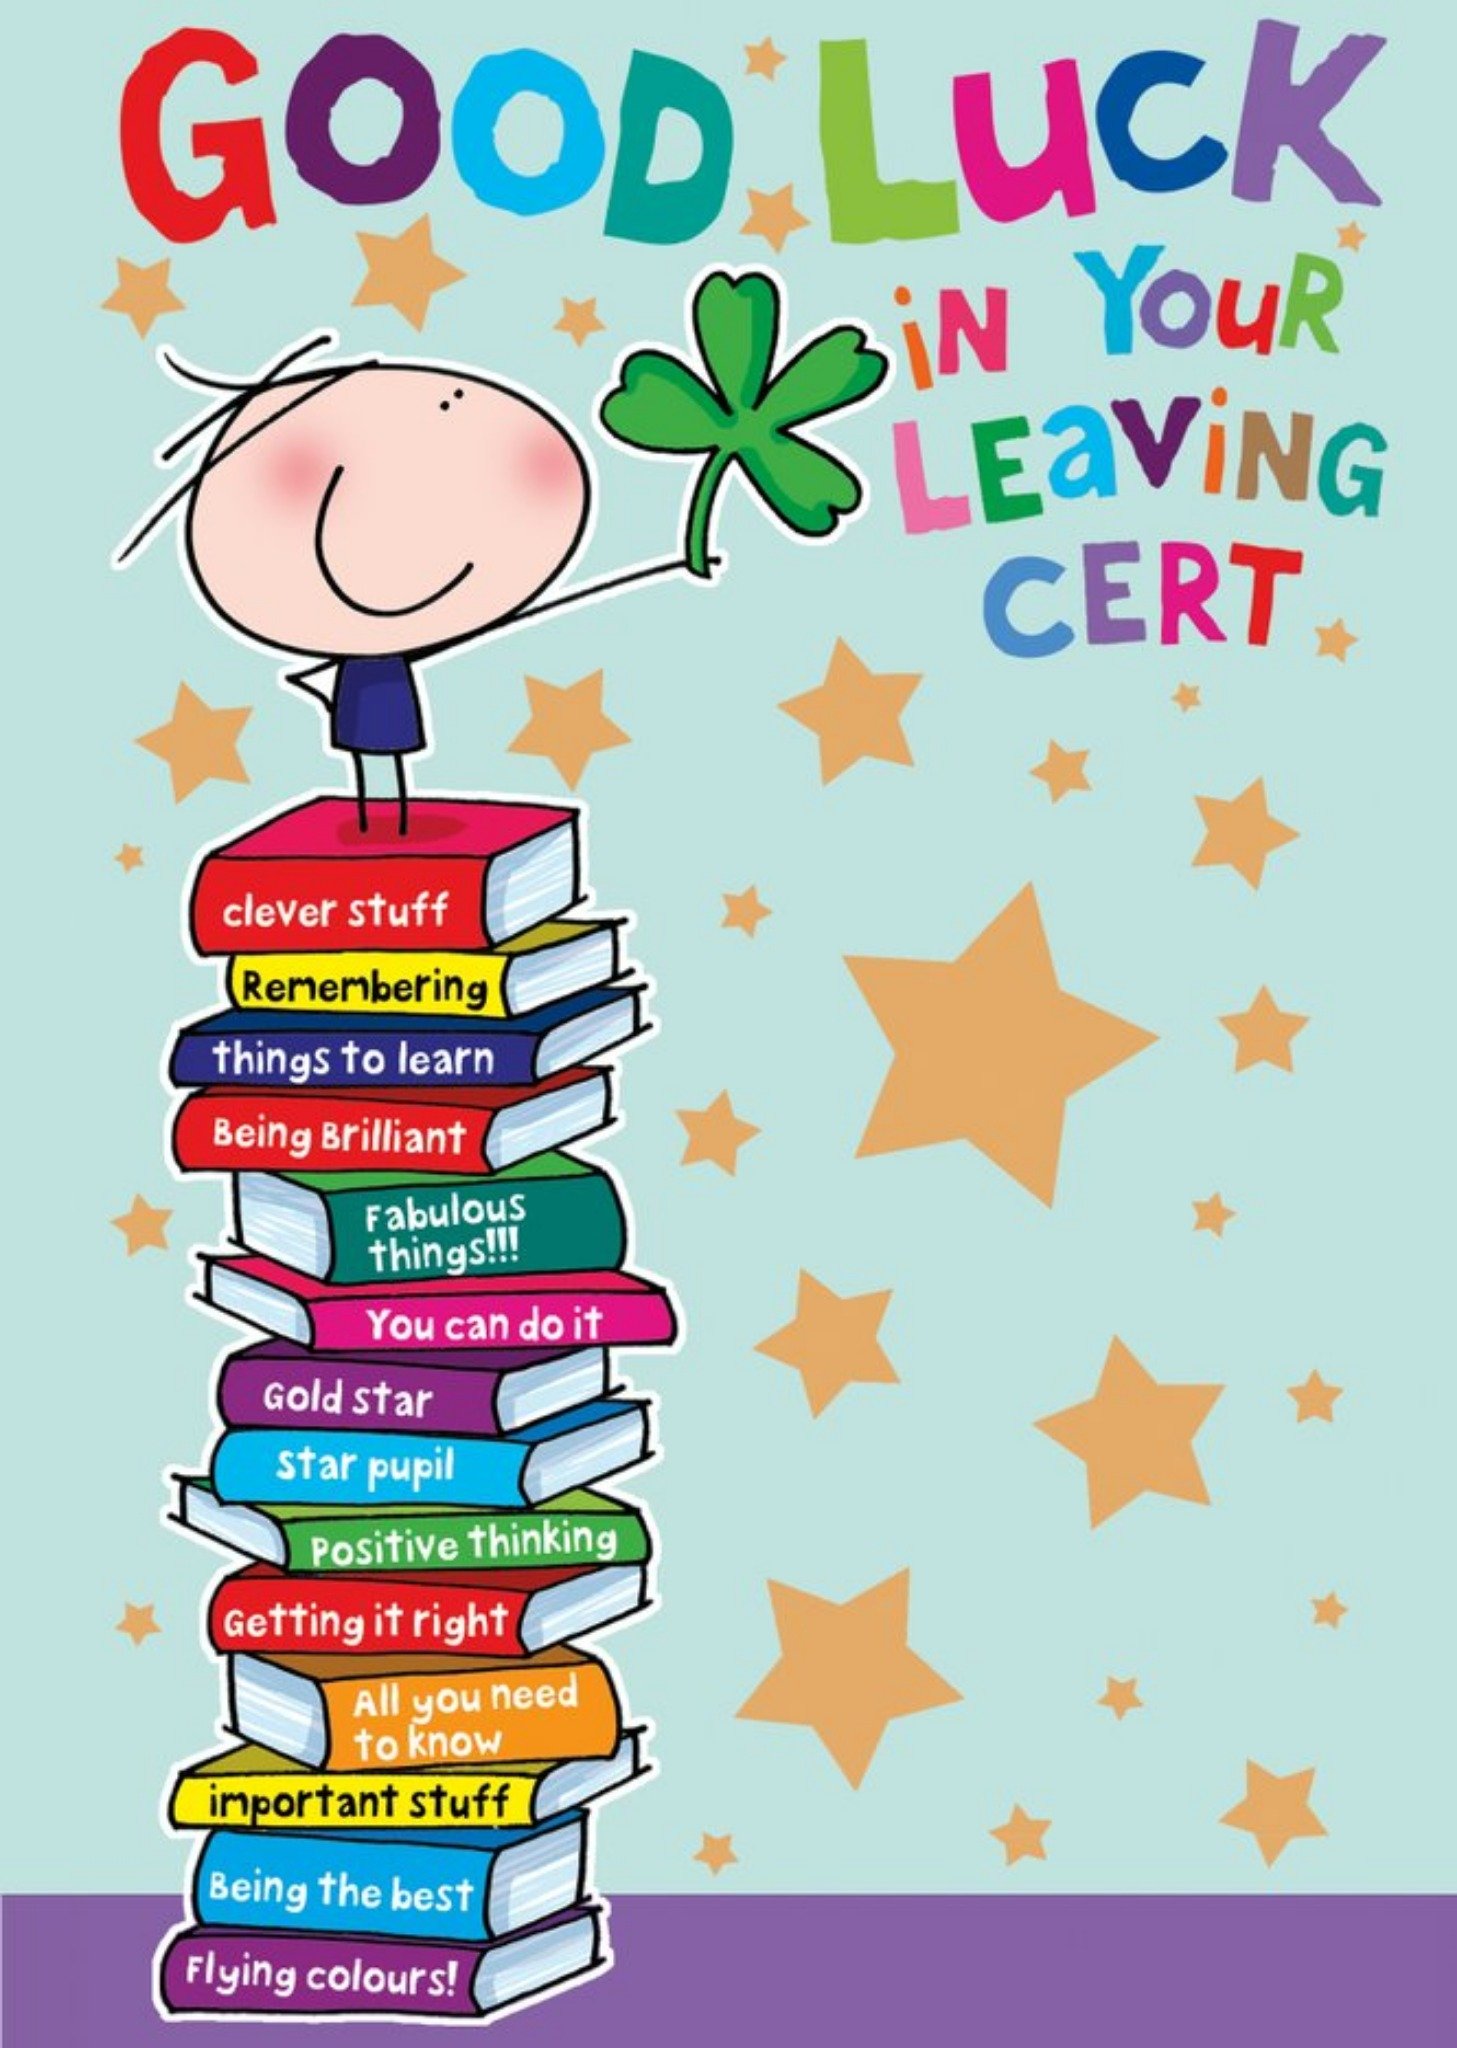 Moonpig Ukg Cute Illustrated Good Luck In Your Leaving Cert Card Ecard